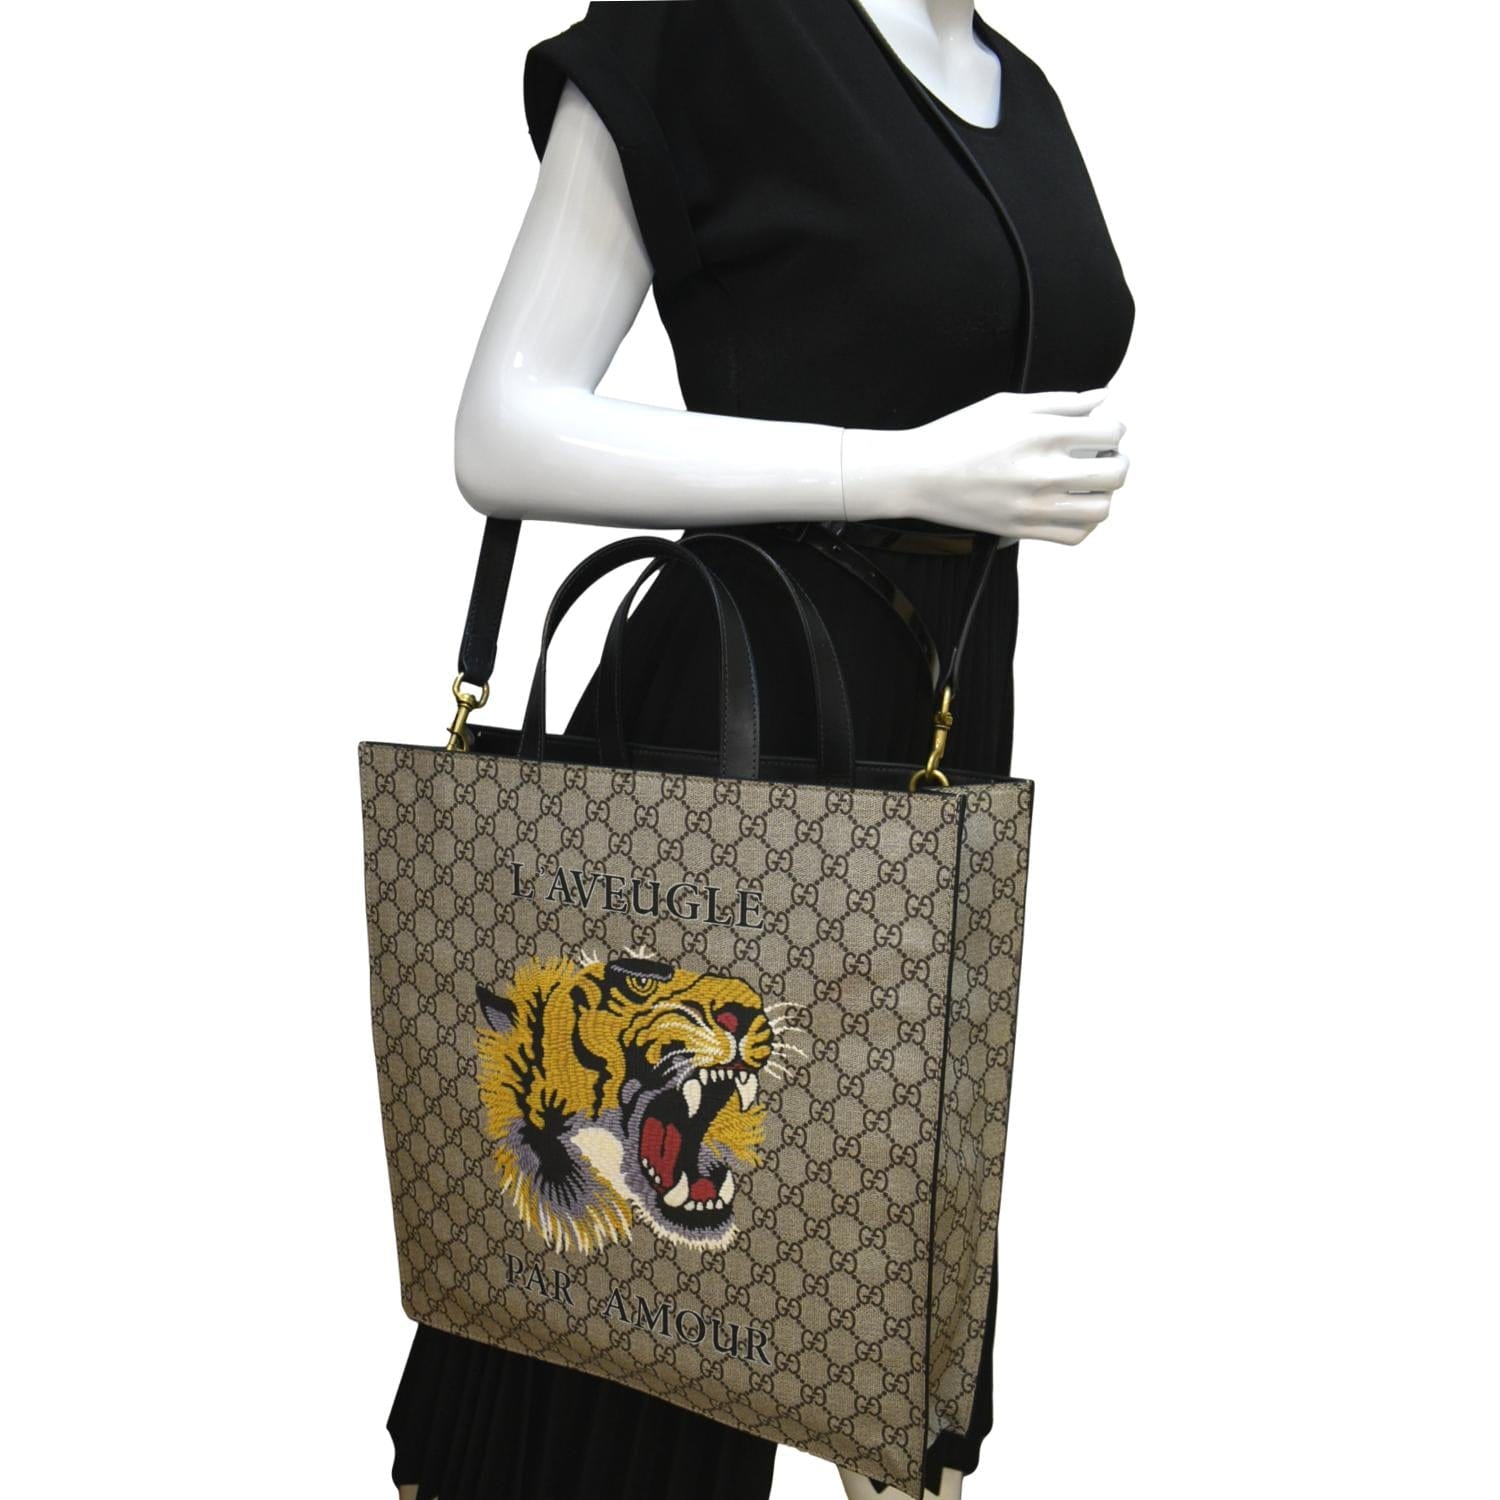 Gucci Accessory Collection Vertical Shopper Tote in GG Canvas with